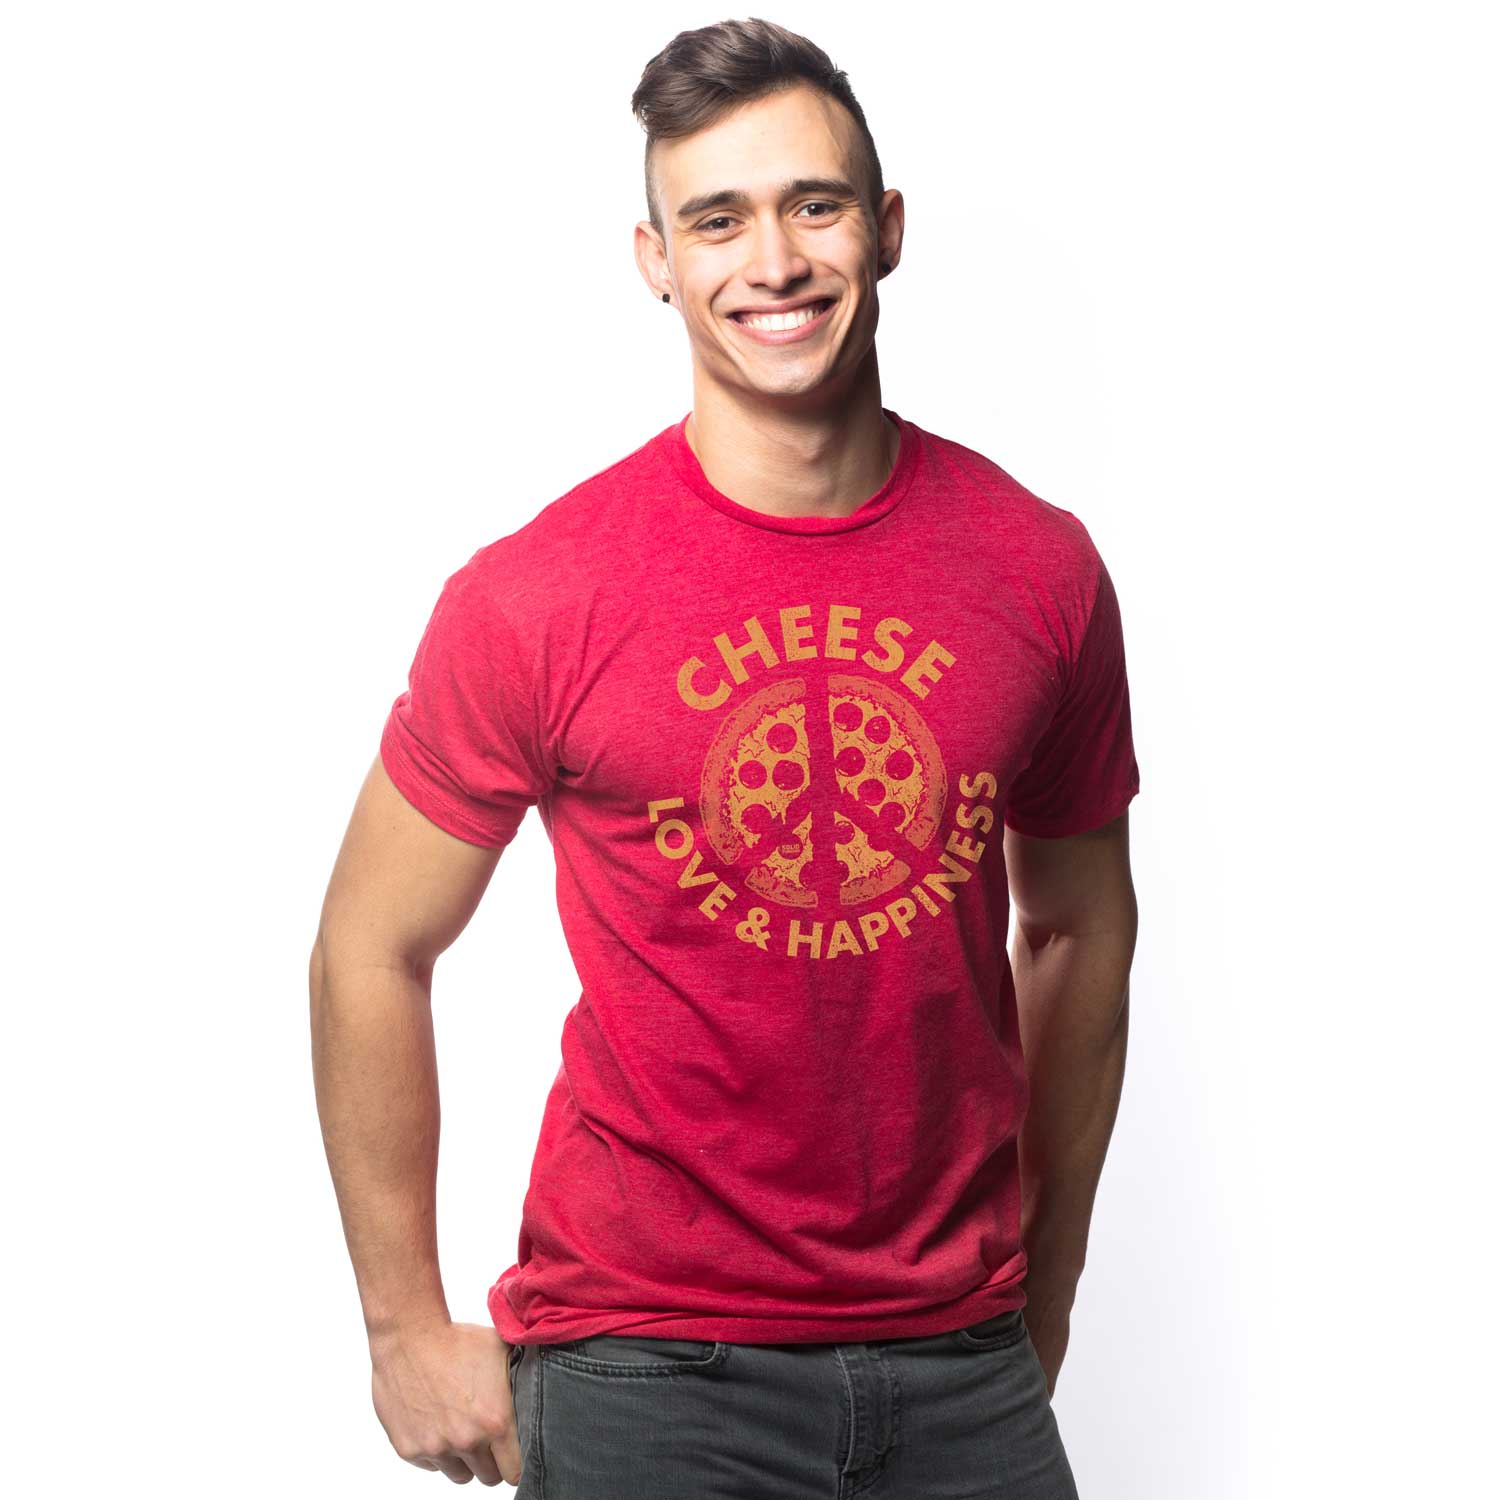 Men's Cheese Love & Happiness Vintage Foodie Graphic Tee | Retro Pizza Chef T-Shirt | Solid Threads